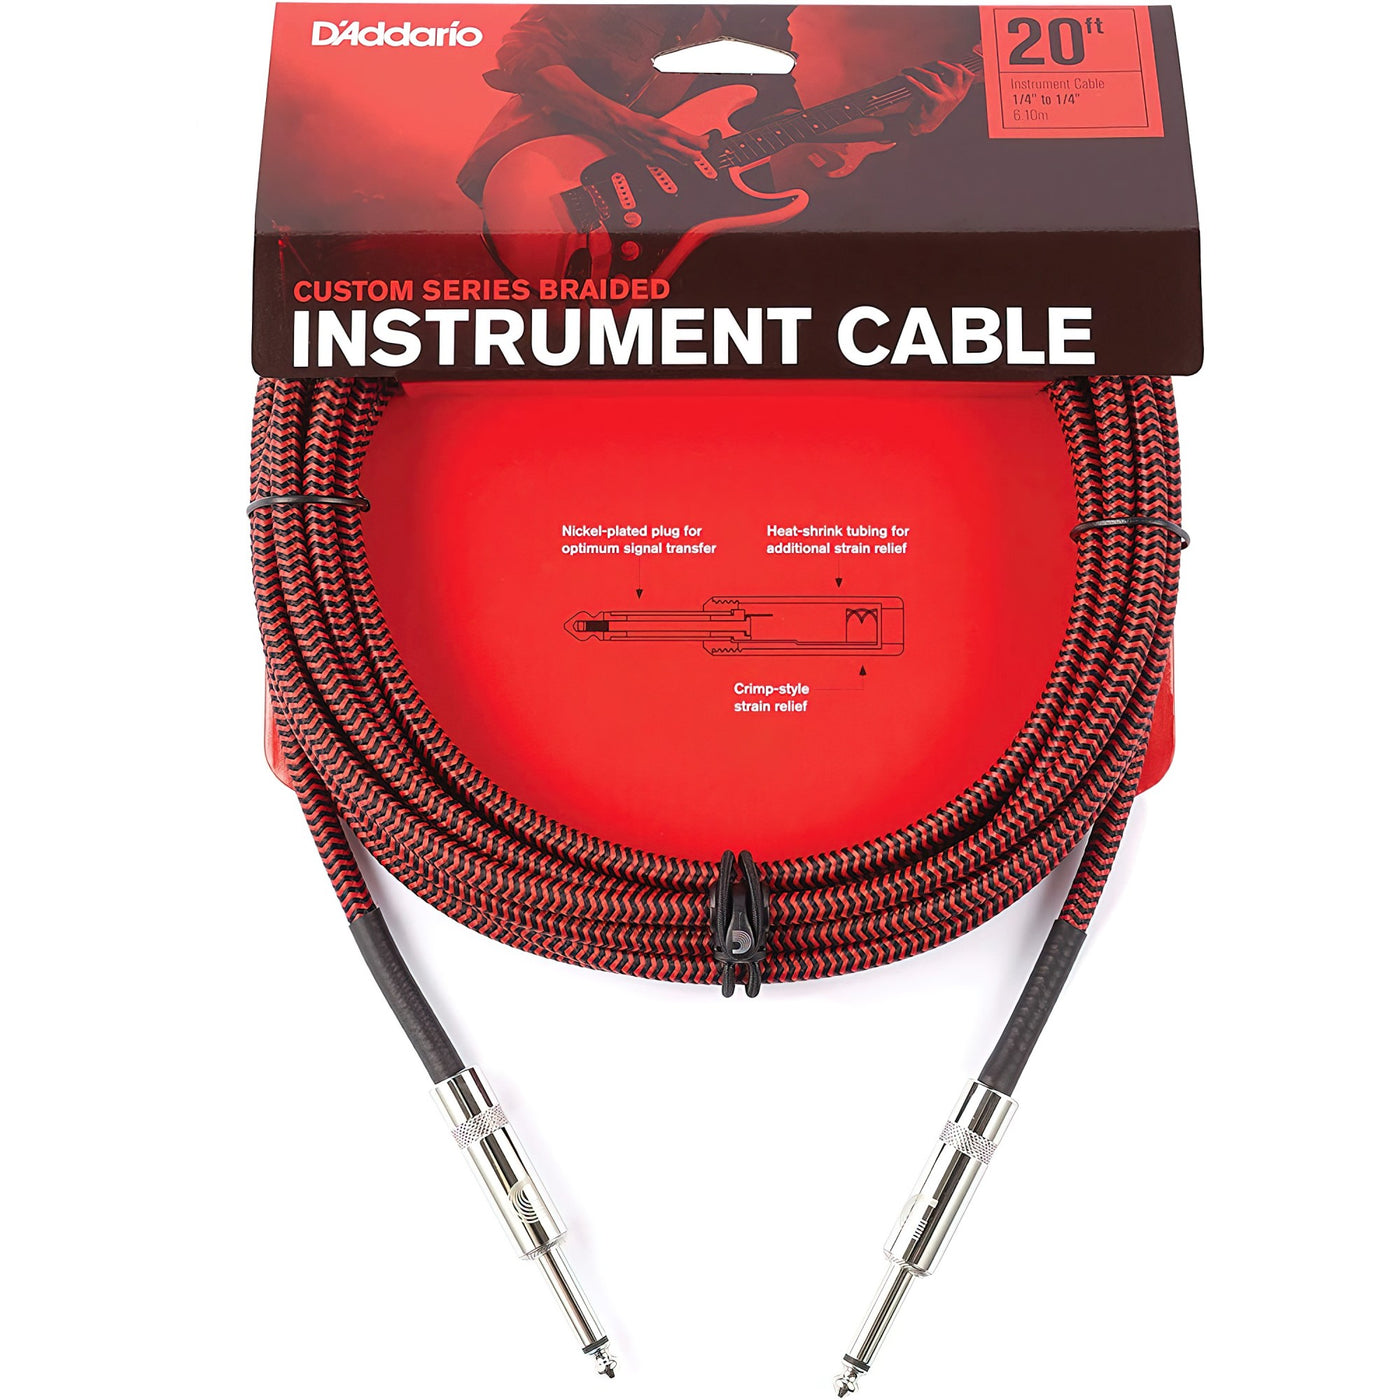 D'Addario Custom Series Braided Instrument Cable, Red, 20' (PW-BG-20RD)